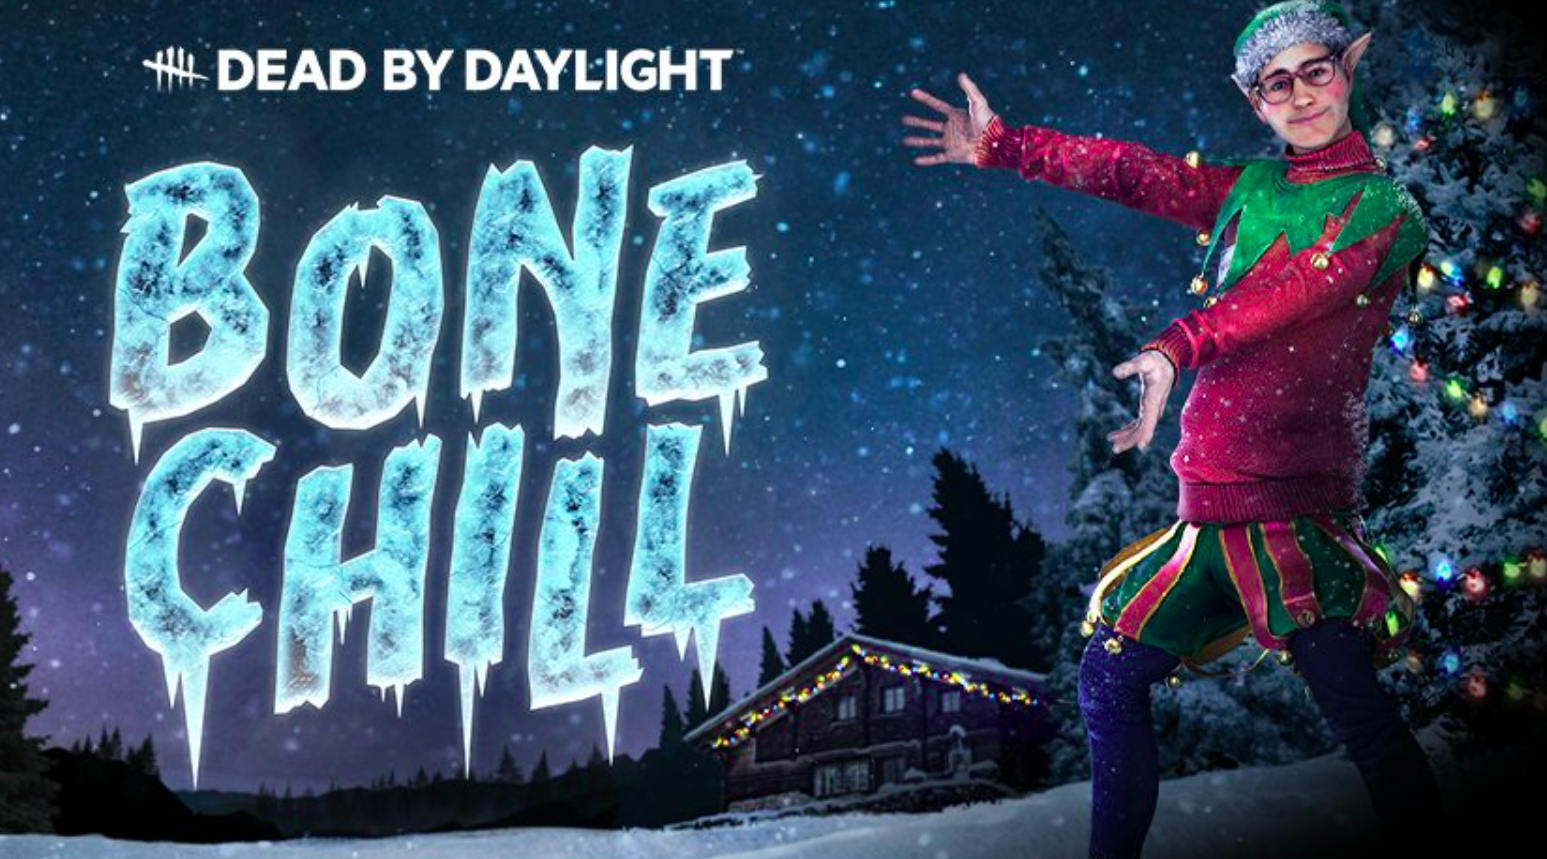 Dead by Daylight The Bone Chill event guide Gayming Magazine